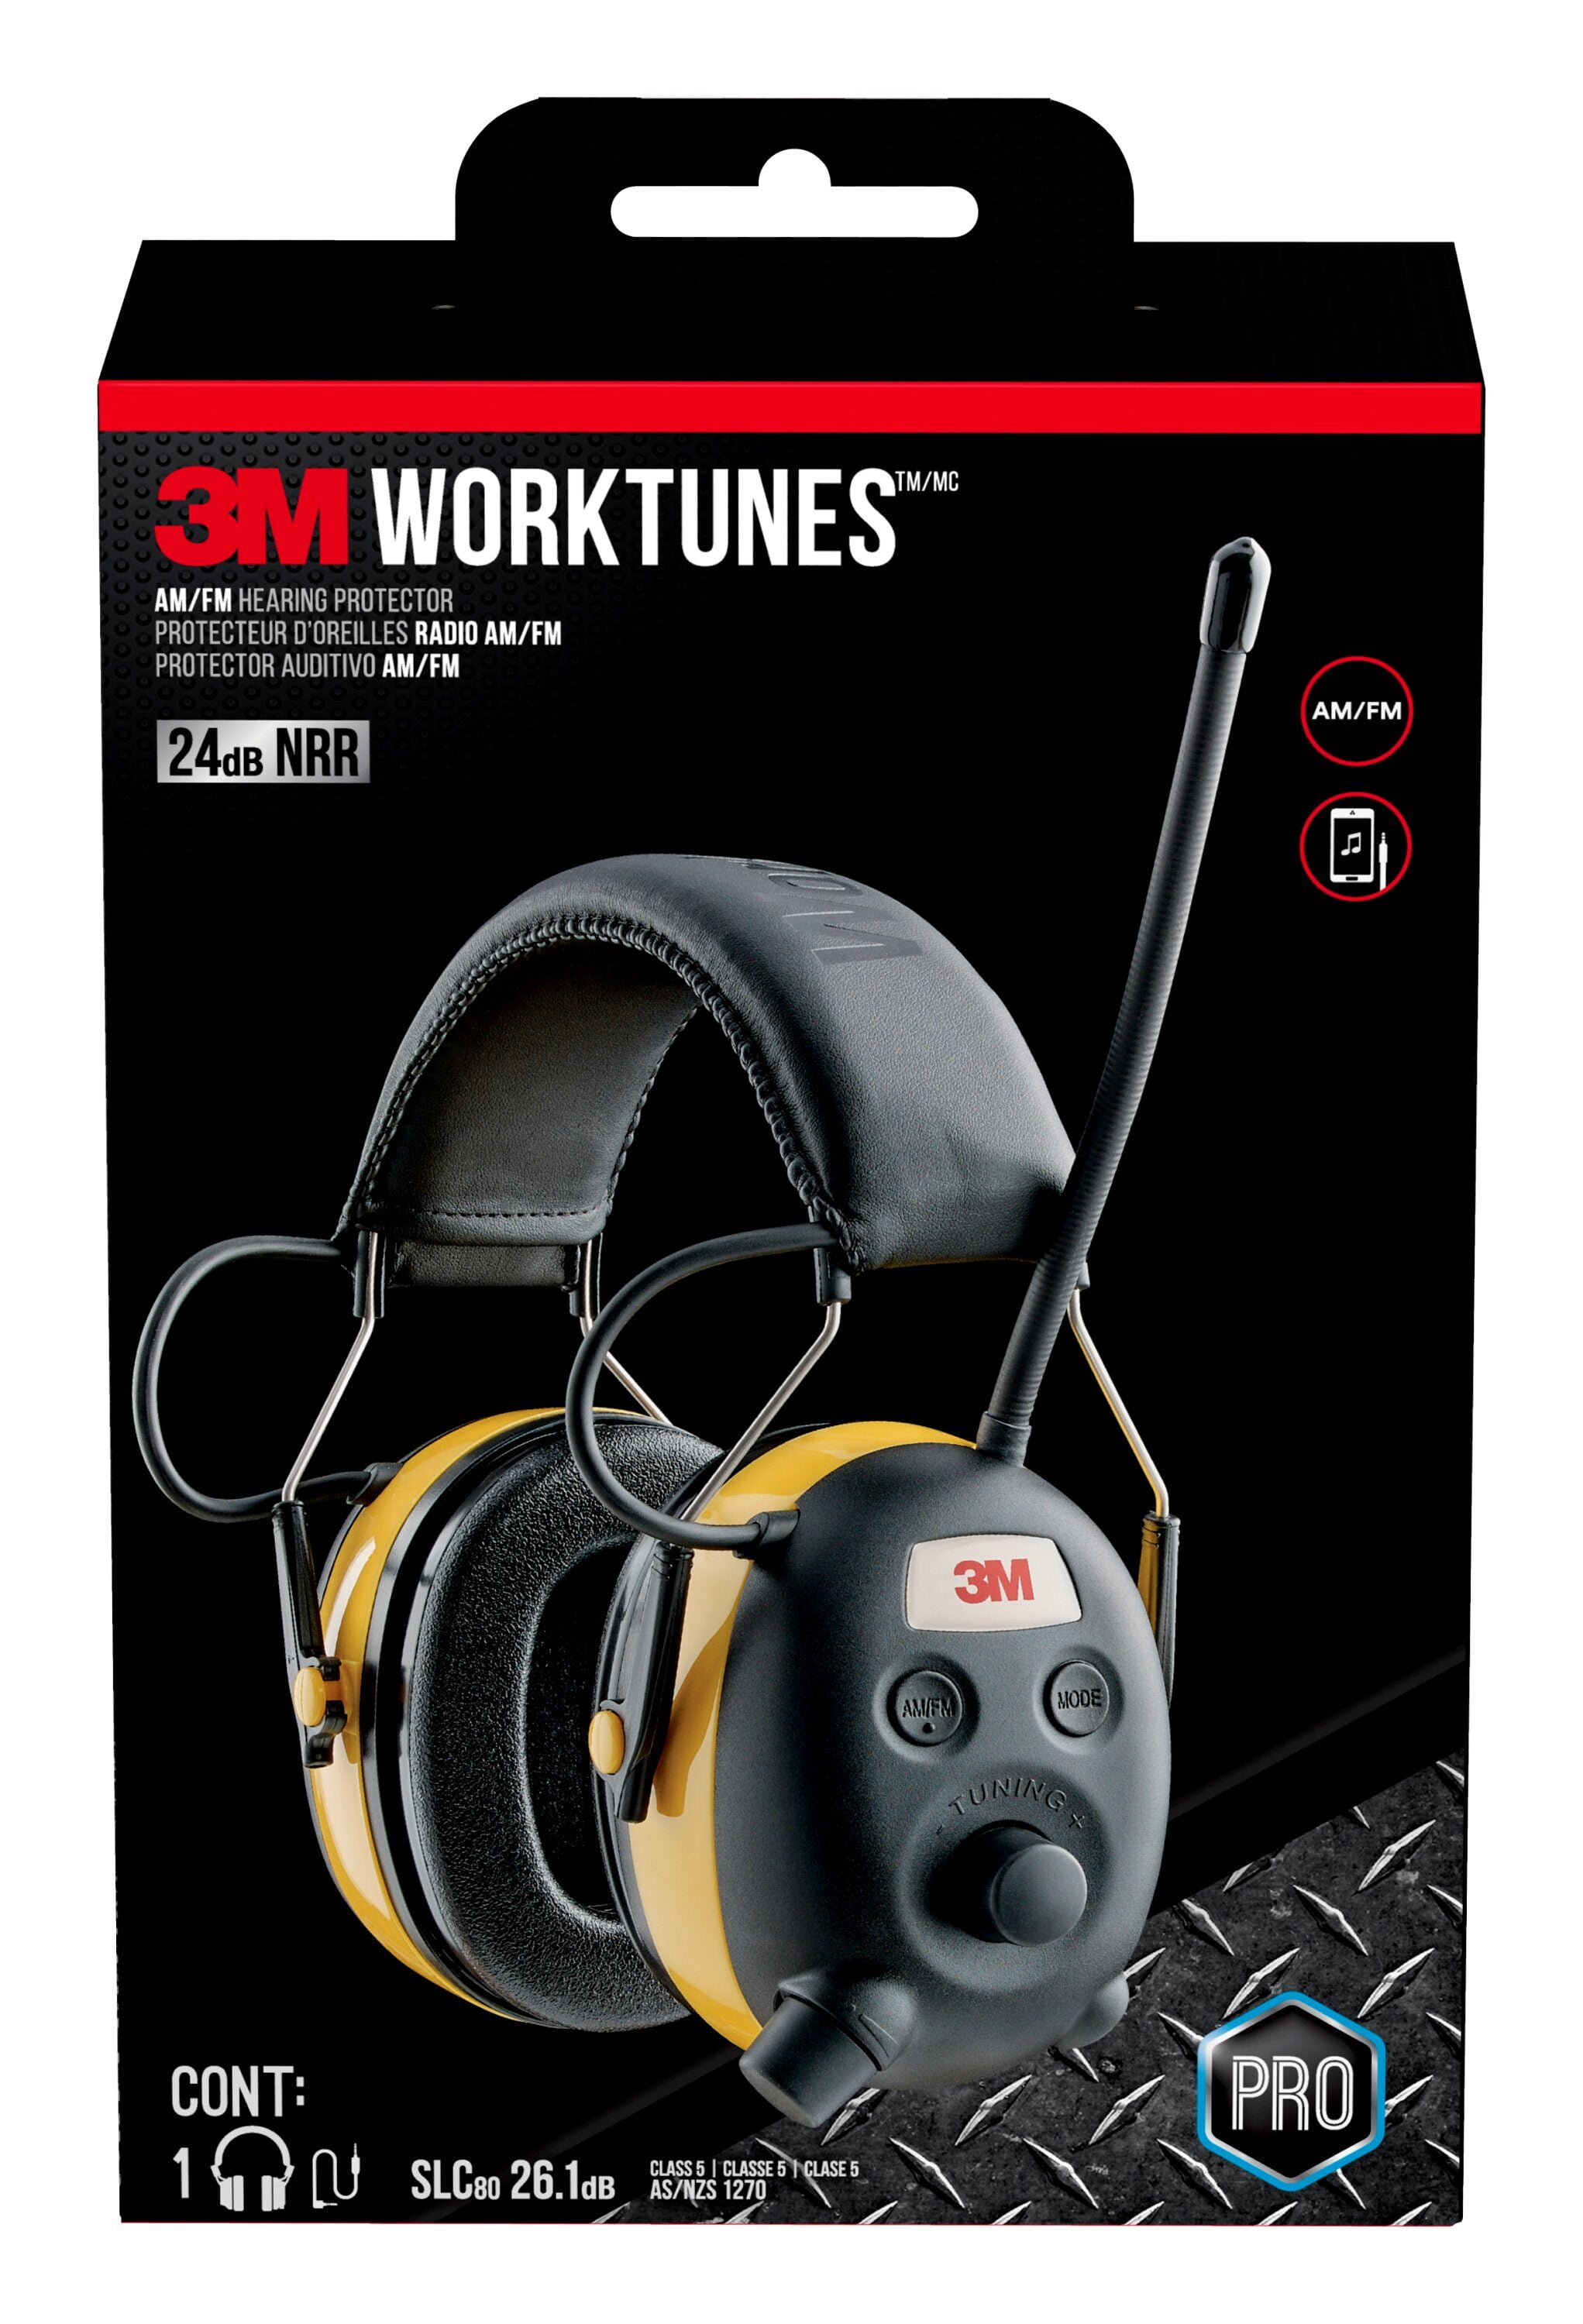 Work Tunes Safety Headphones For Hearing Protection BT 3M Digital Radio AM//FM